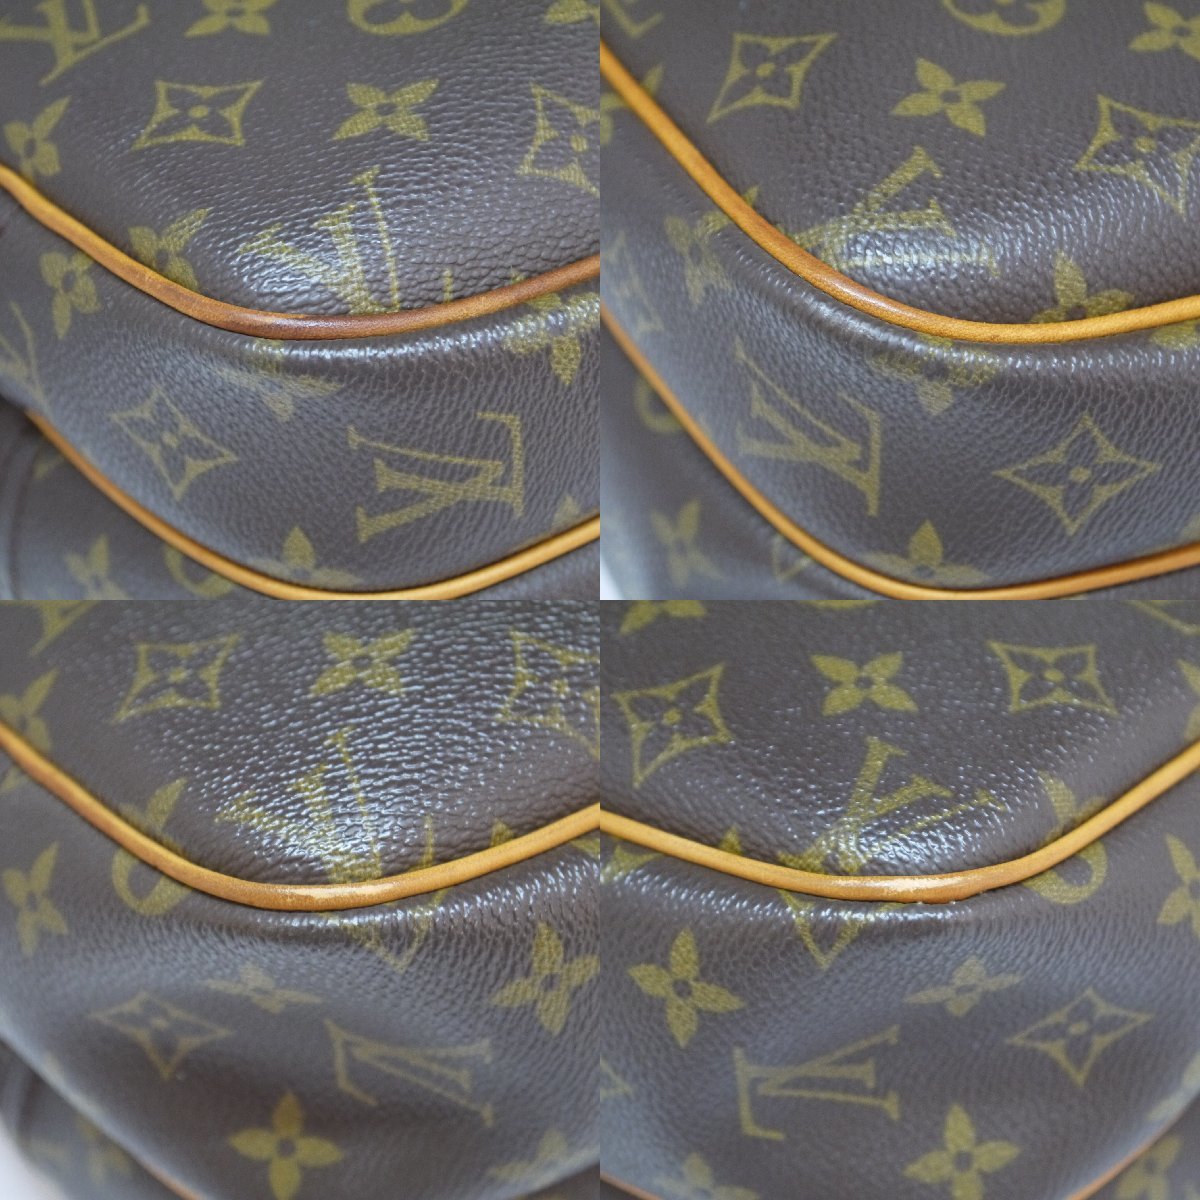 USED品・保管品 Louis Vuitton ルイヴィトン M45254 リポーターPM